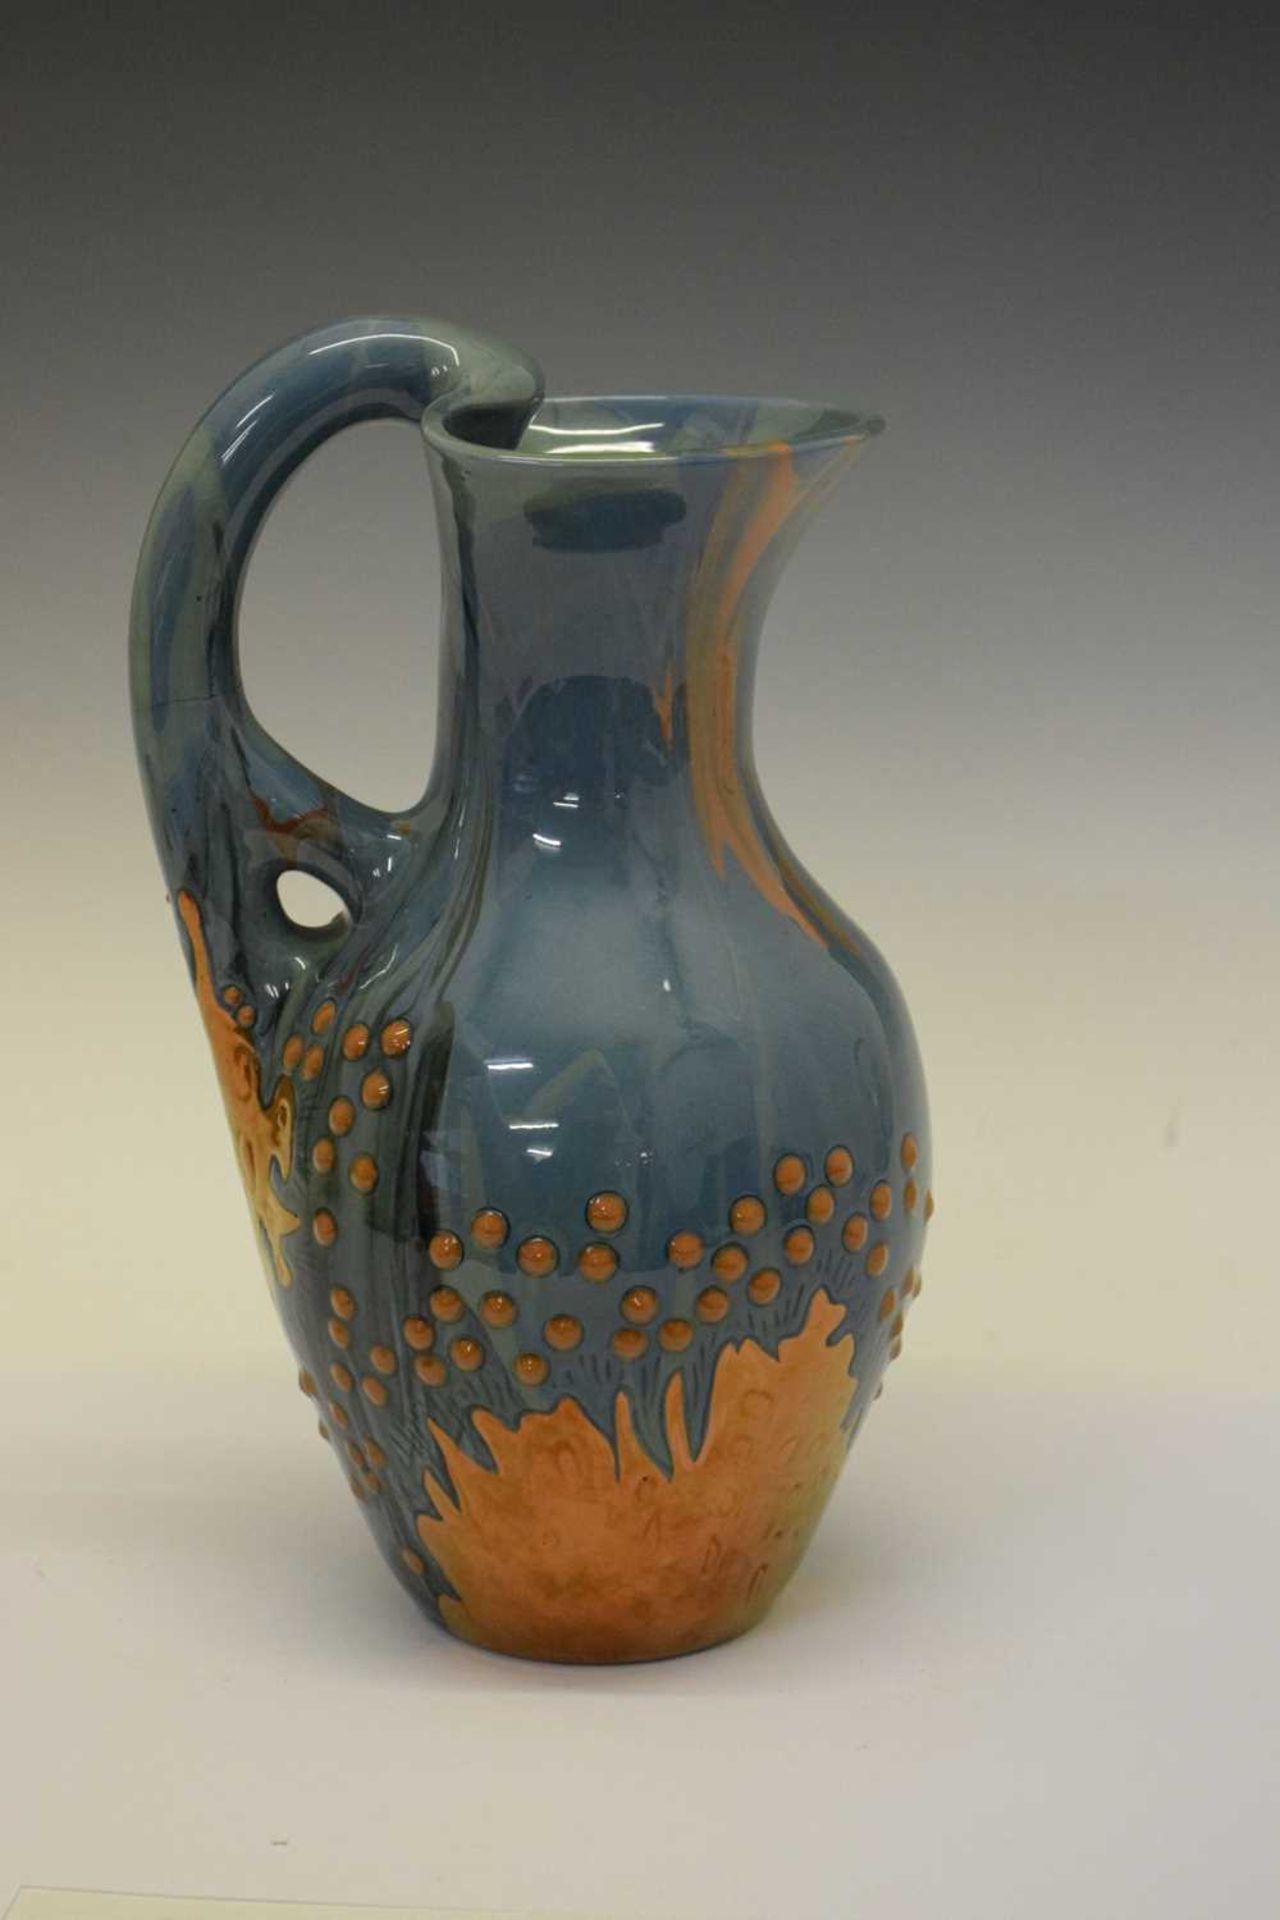 Elton ware jug with slip ware and lustre finish - Image 5 of 9